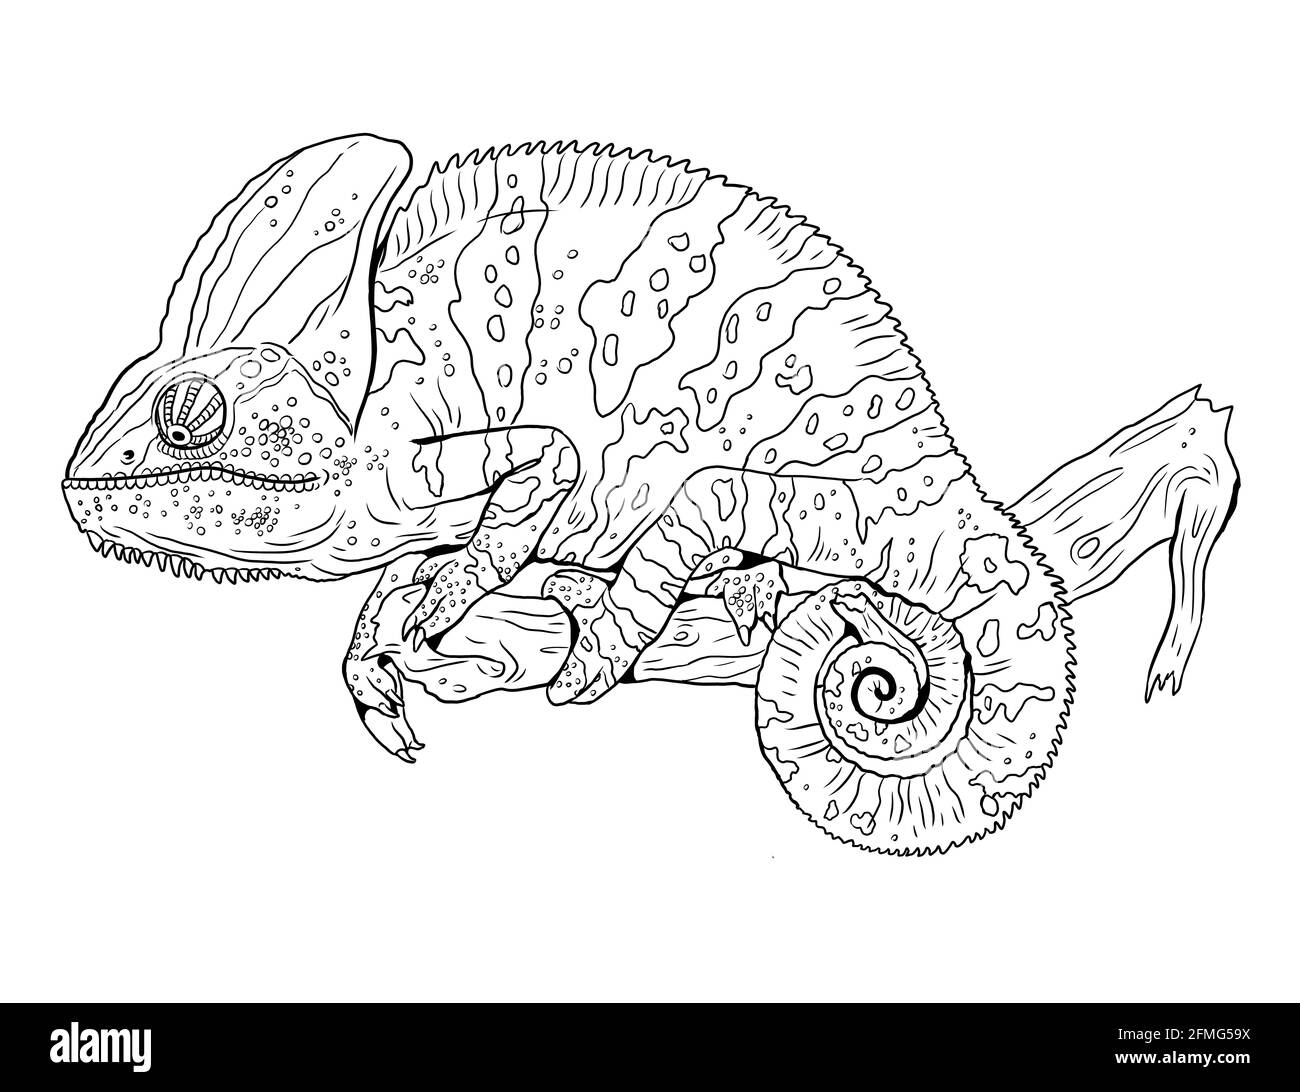 Chameleon in nature illustration. Coloring template for kids. Stock Photo